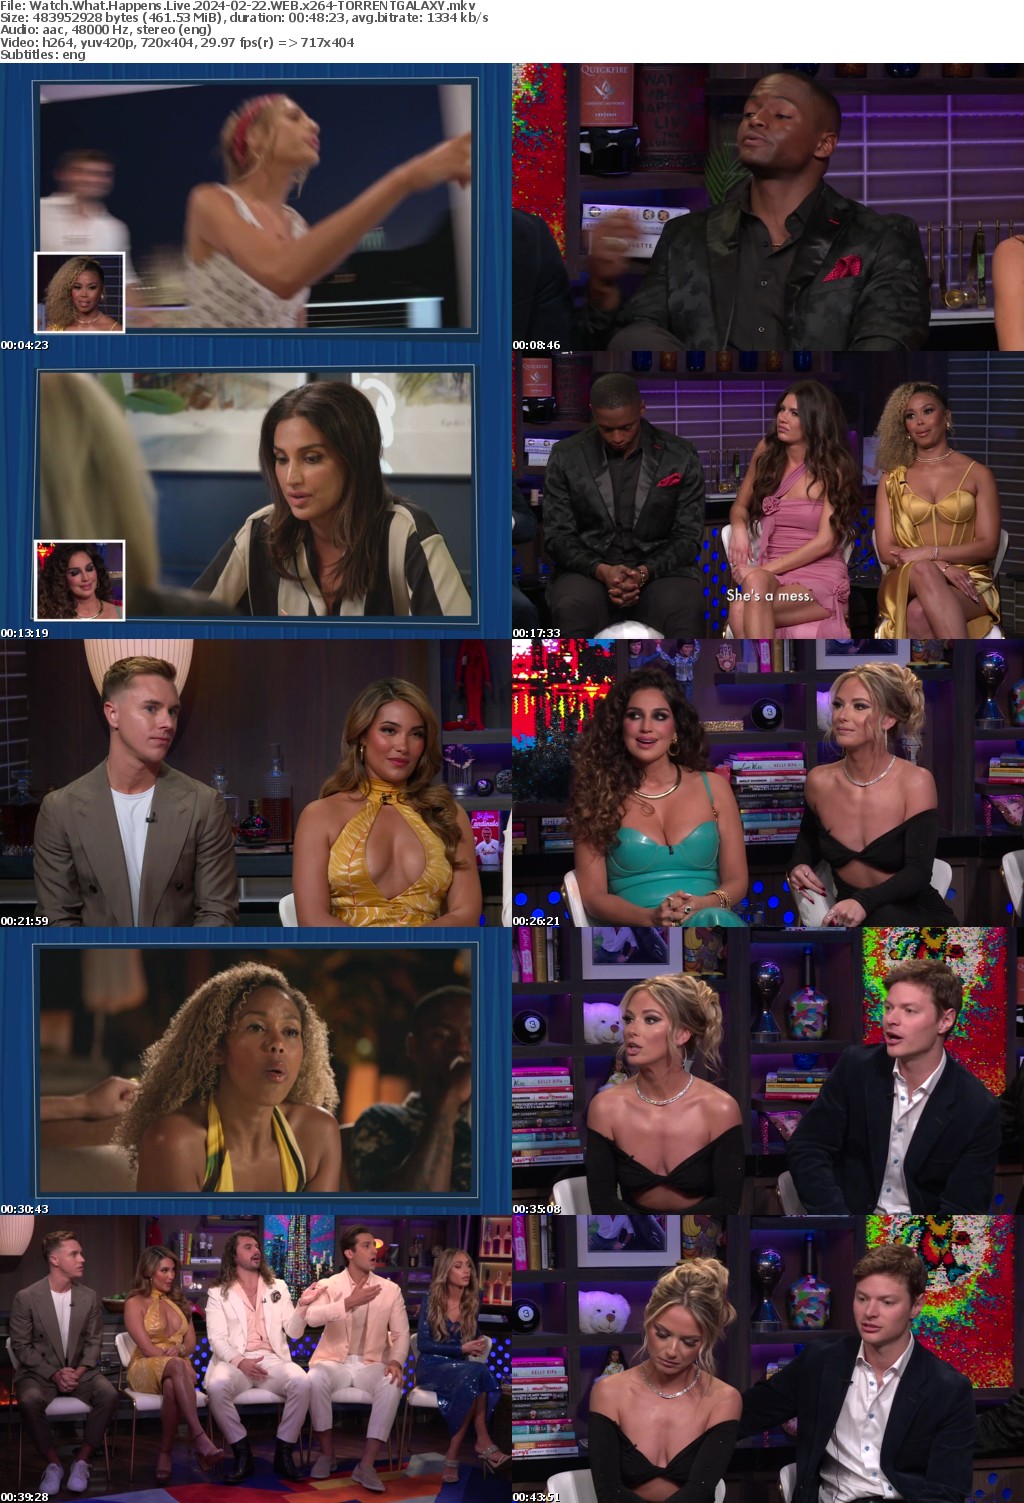 Watch What Happens Live 2024-02-22 WEB x264-GALAXY